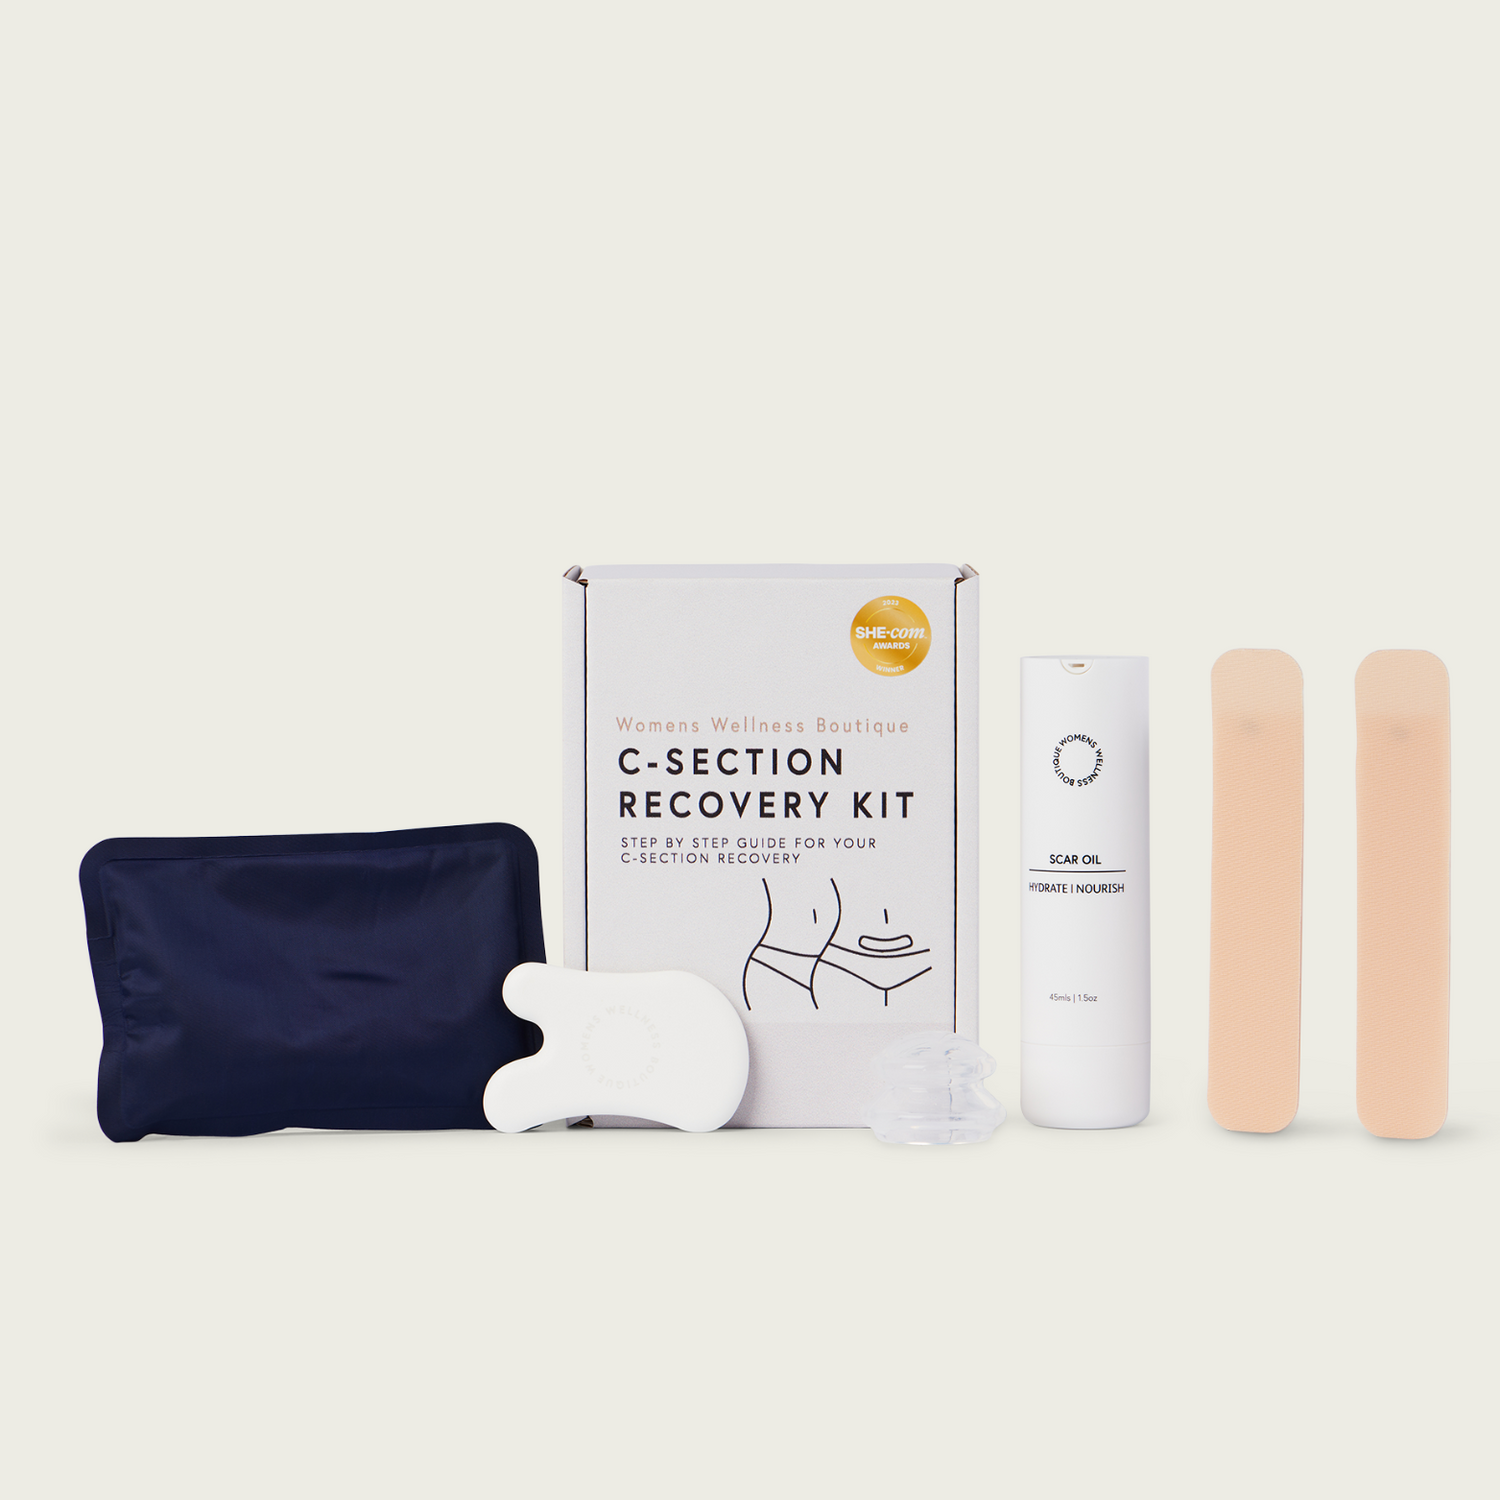 Cesarean c-section Recovery Kit -  UK